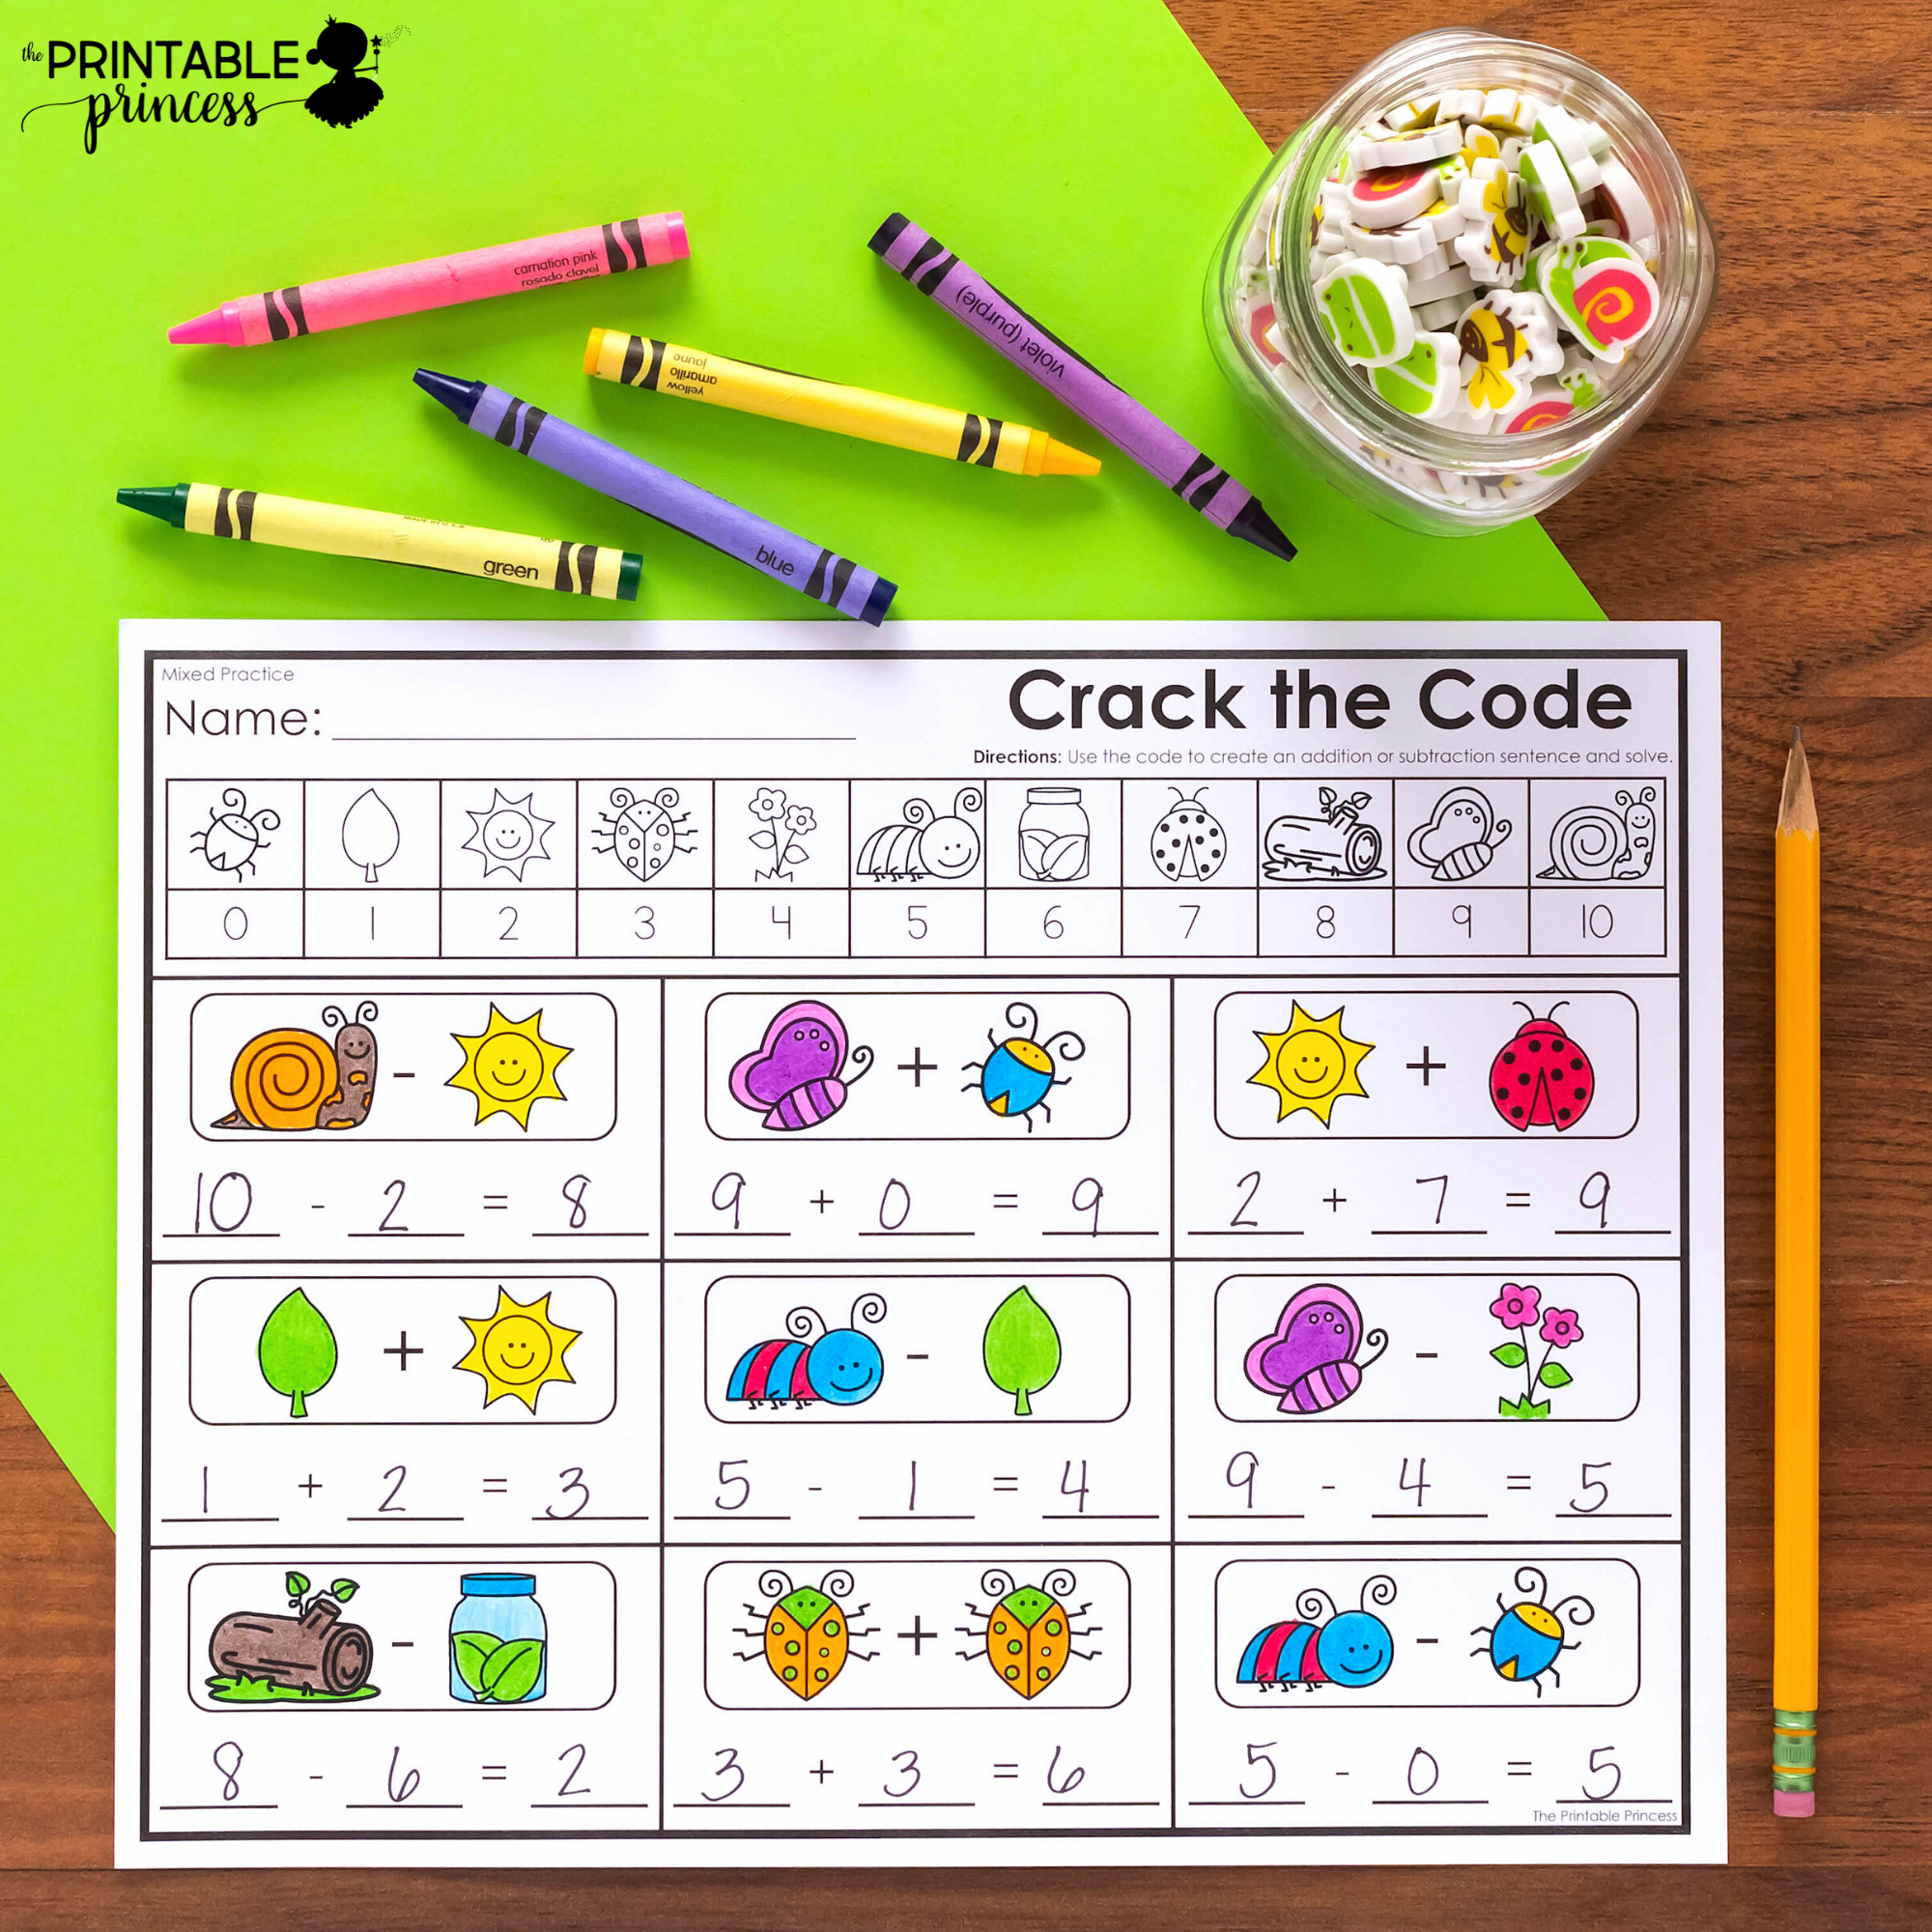 37-cracking-the-code-of-life-worksheet-combining-like-terms-worksheet